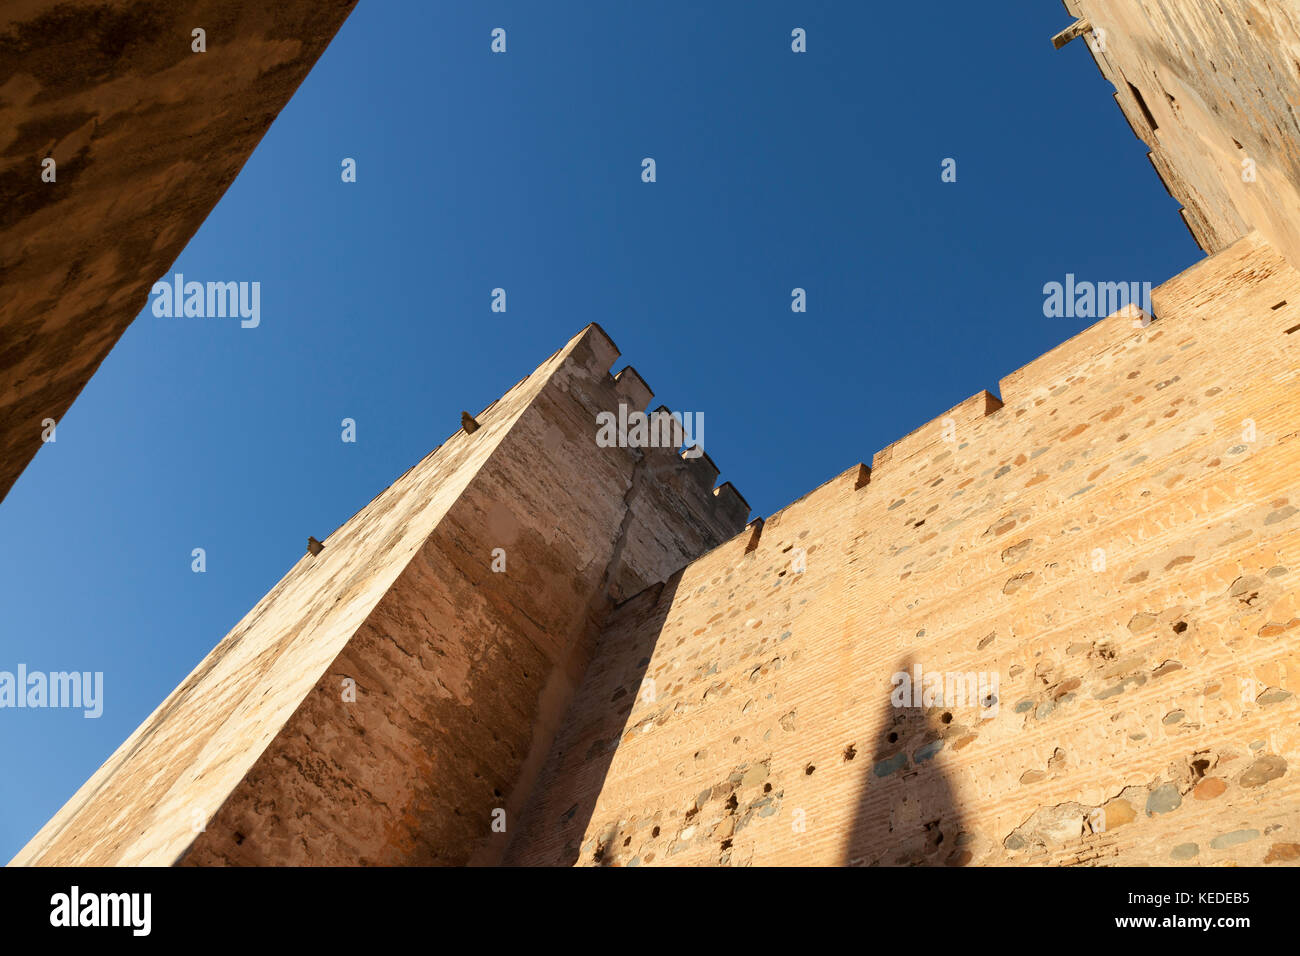 Granada, Spain: The Alhambra Palace and Fortress. Plaza de Armas at the Alcazaba fortress. The two towers, Torre del Homenaje and Torre Quebrada, serv Stock Photo